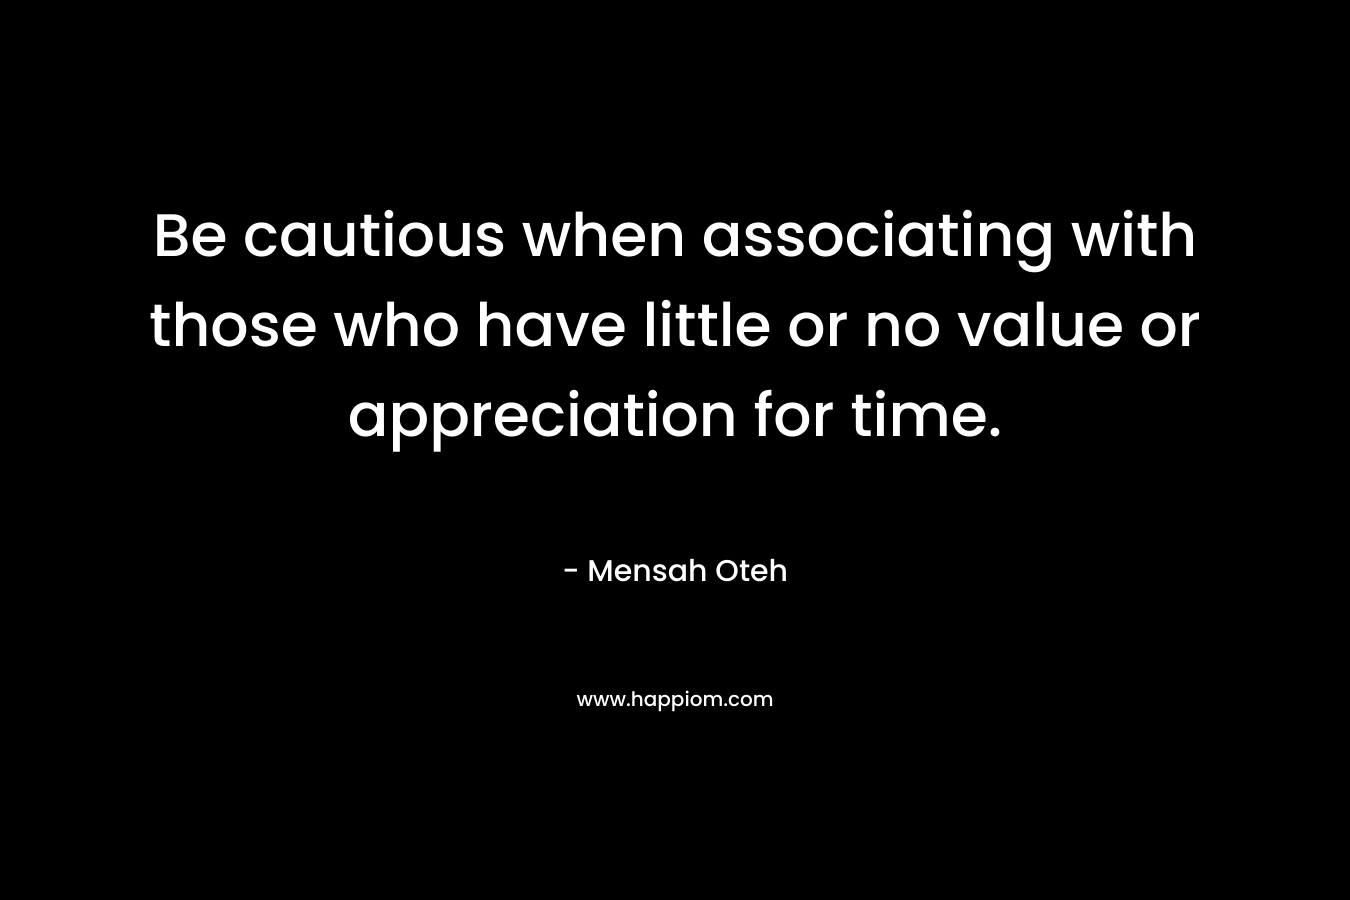 Be cautious when associating with those who have little or no value or appreciation for time.